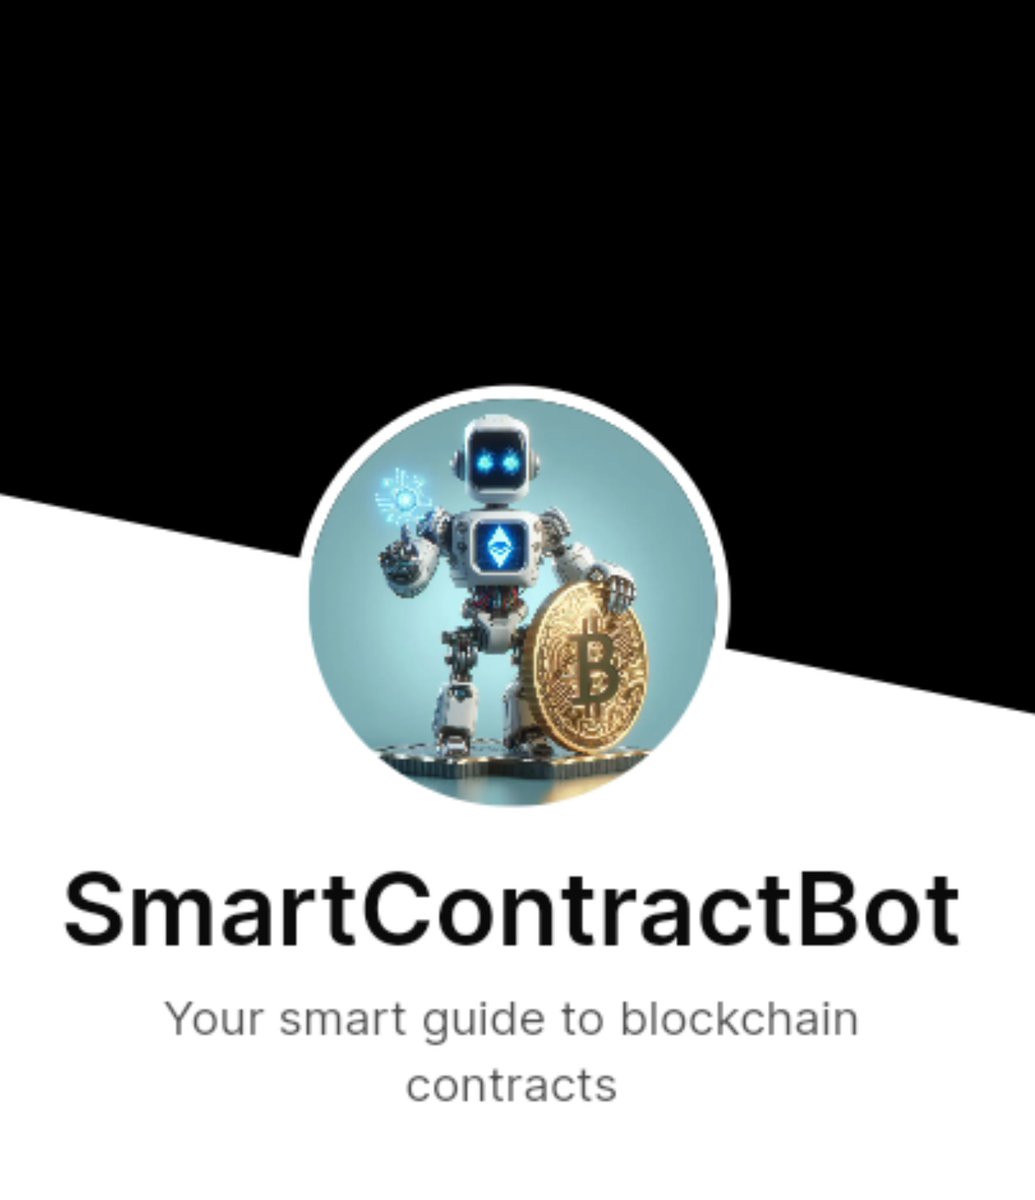 $CHAT UTILITY CHARACTER 

With @vectorchatai
I created *SmartContractBot* 
{A smart guide to blockchain contracts} 👏
 
It's Knowledgebase has been set to generate dynamic prompt responses based on specific user queries 

Here's how it works 🔻